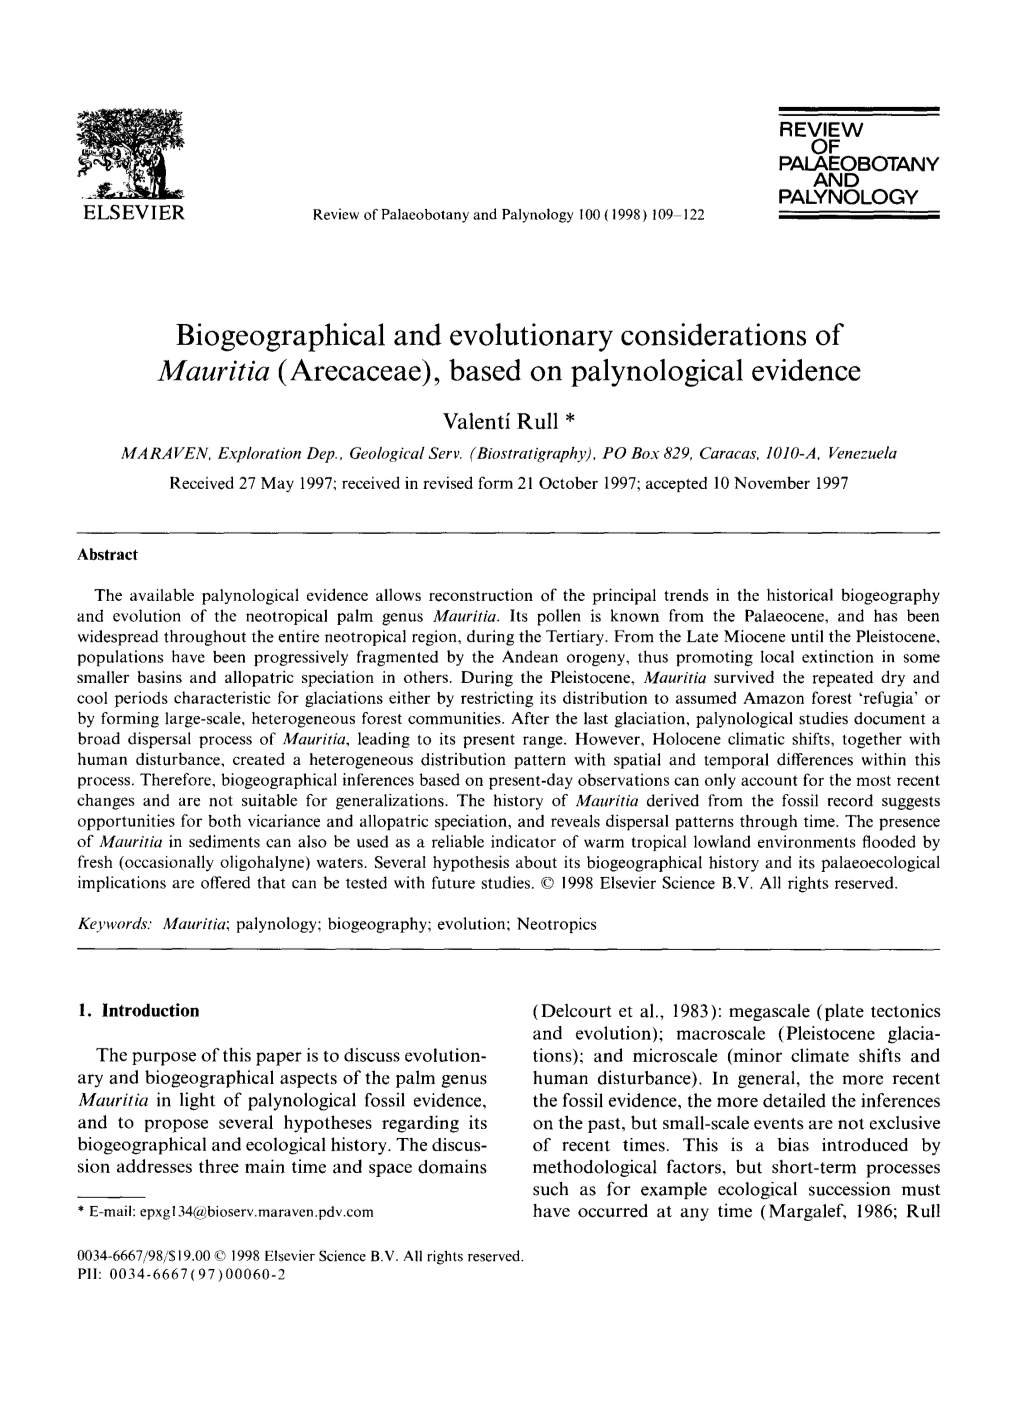 Biogeographical and Evolutionary Considerations of Mauritia (Arecaceae), Based on Palynological Evidence